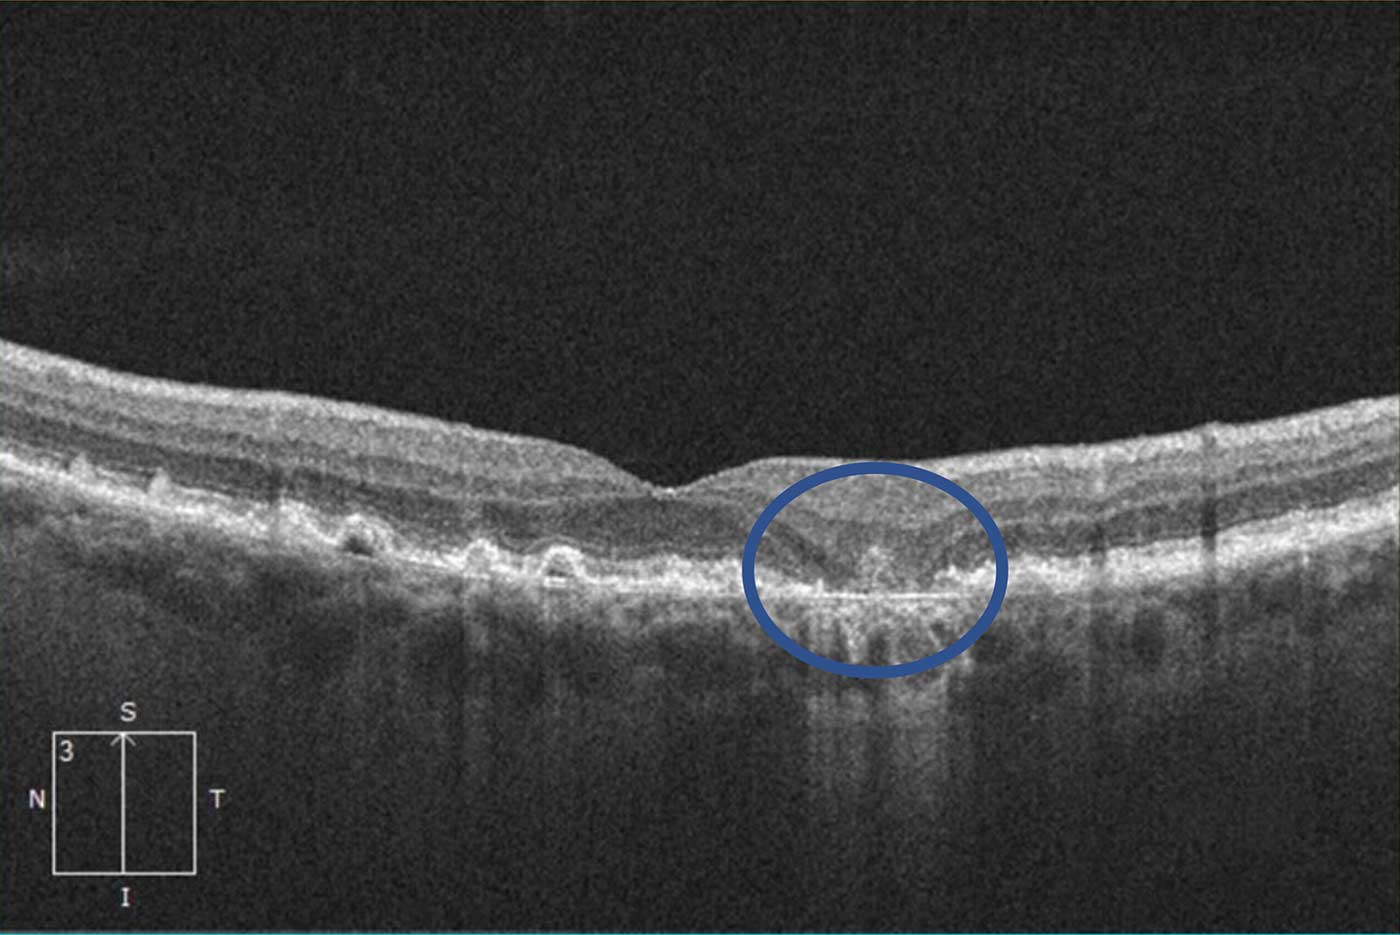 Retinal atrophy, a common symptom of advanced dry macular degeneration, causing blind spots in central vision